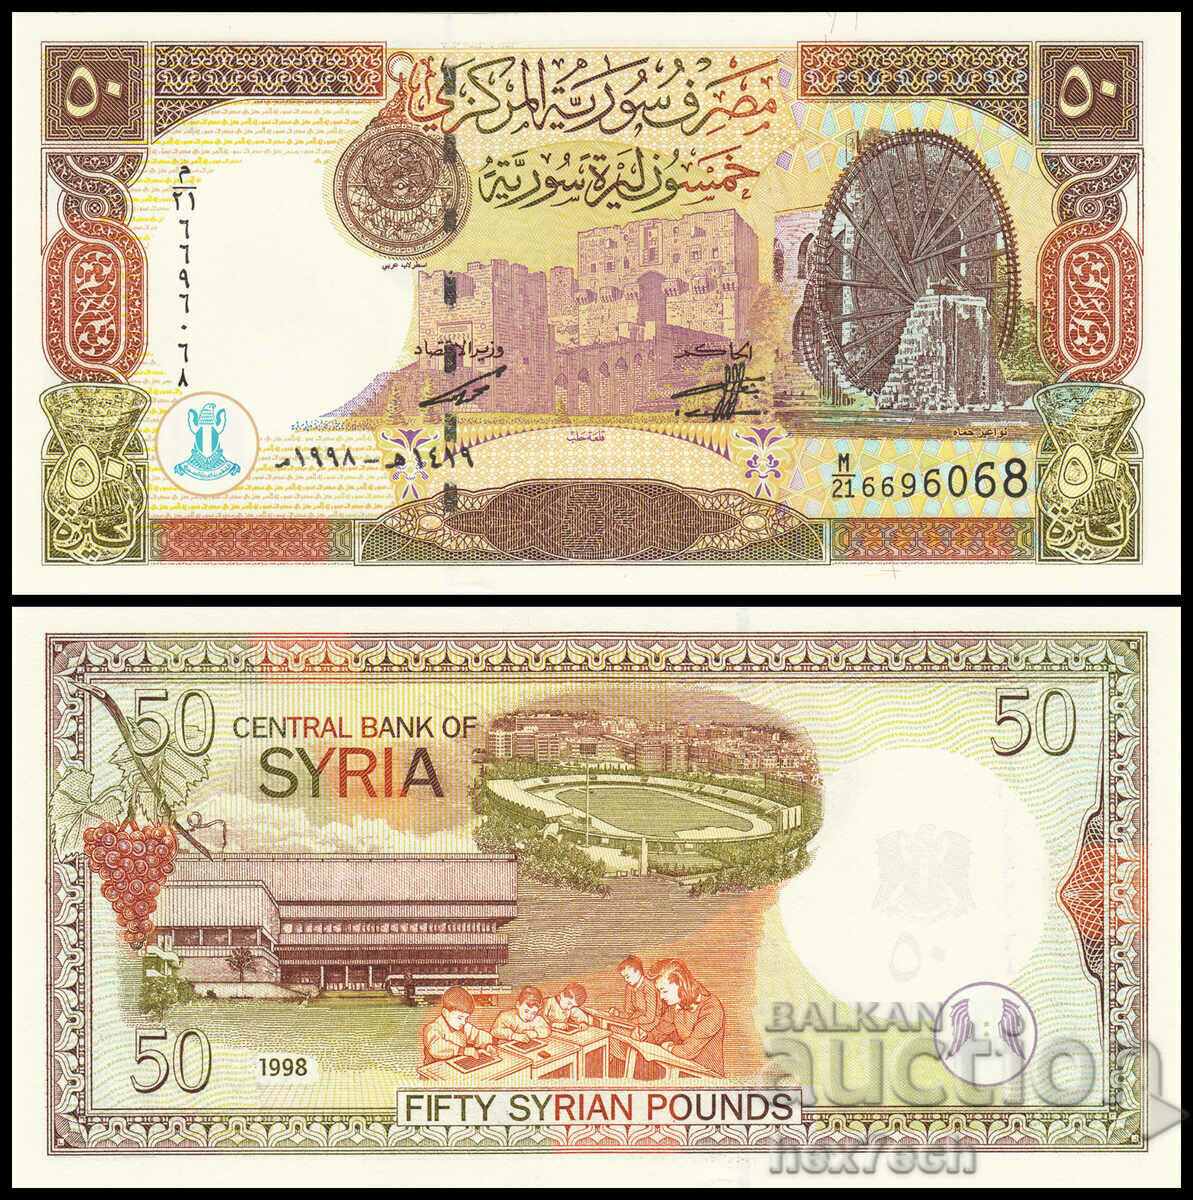 ❤️ ⭐ Syria 1998 50 pounds UNC new ⭐ ❤️